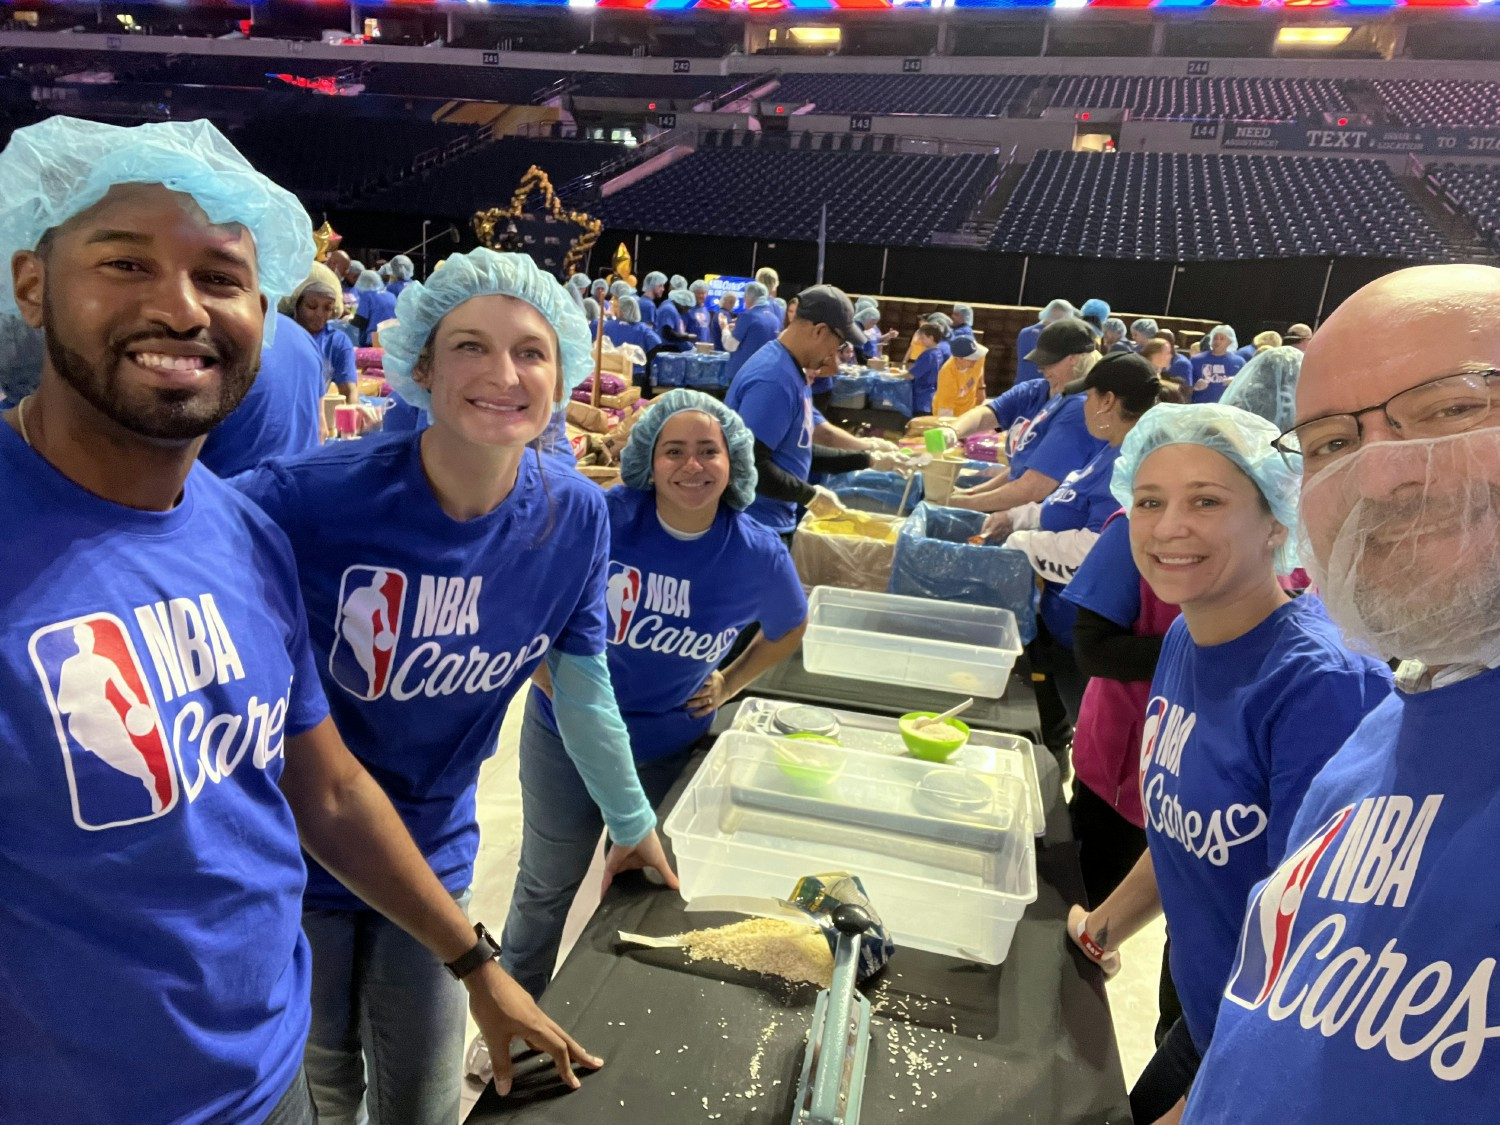 Our team partnered with NBA Cares and others to prepare 1 million meals in 24 hours for the All-Star Game Day of Service